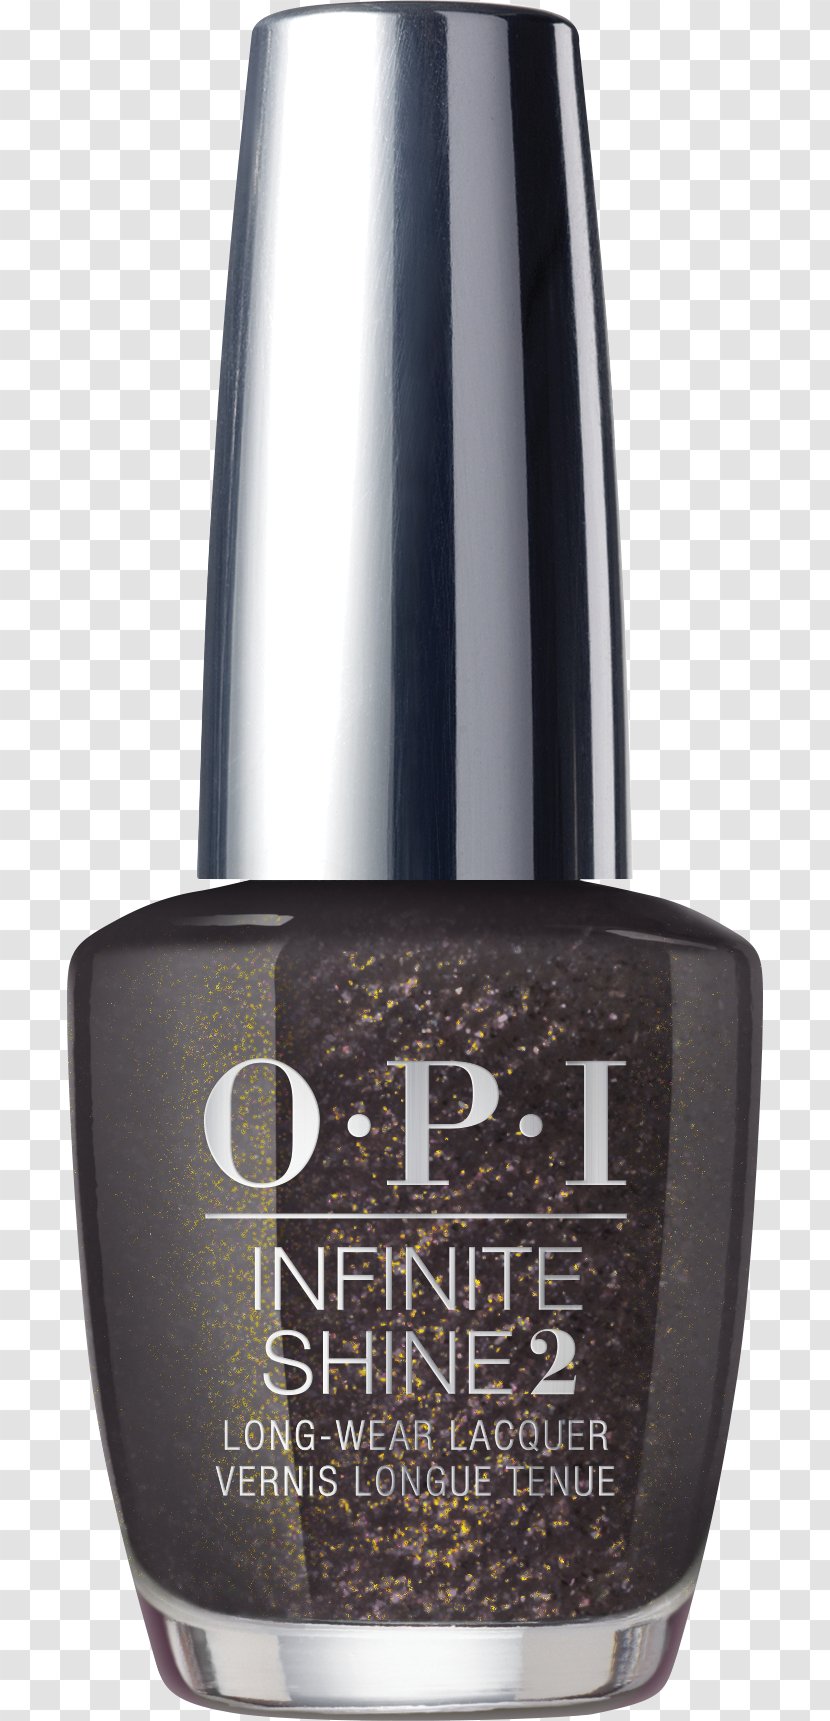 OPI Products Infinite Shine2 Nail Lacquer Polish Manicure - Nicole By Opi Transparent PNG